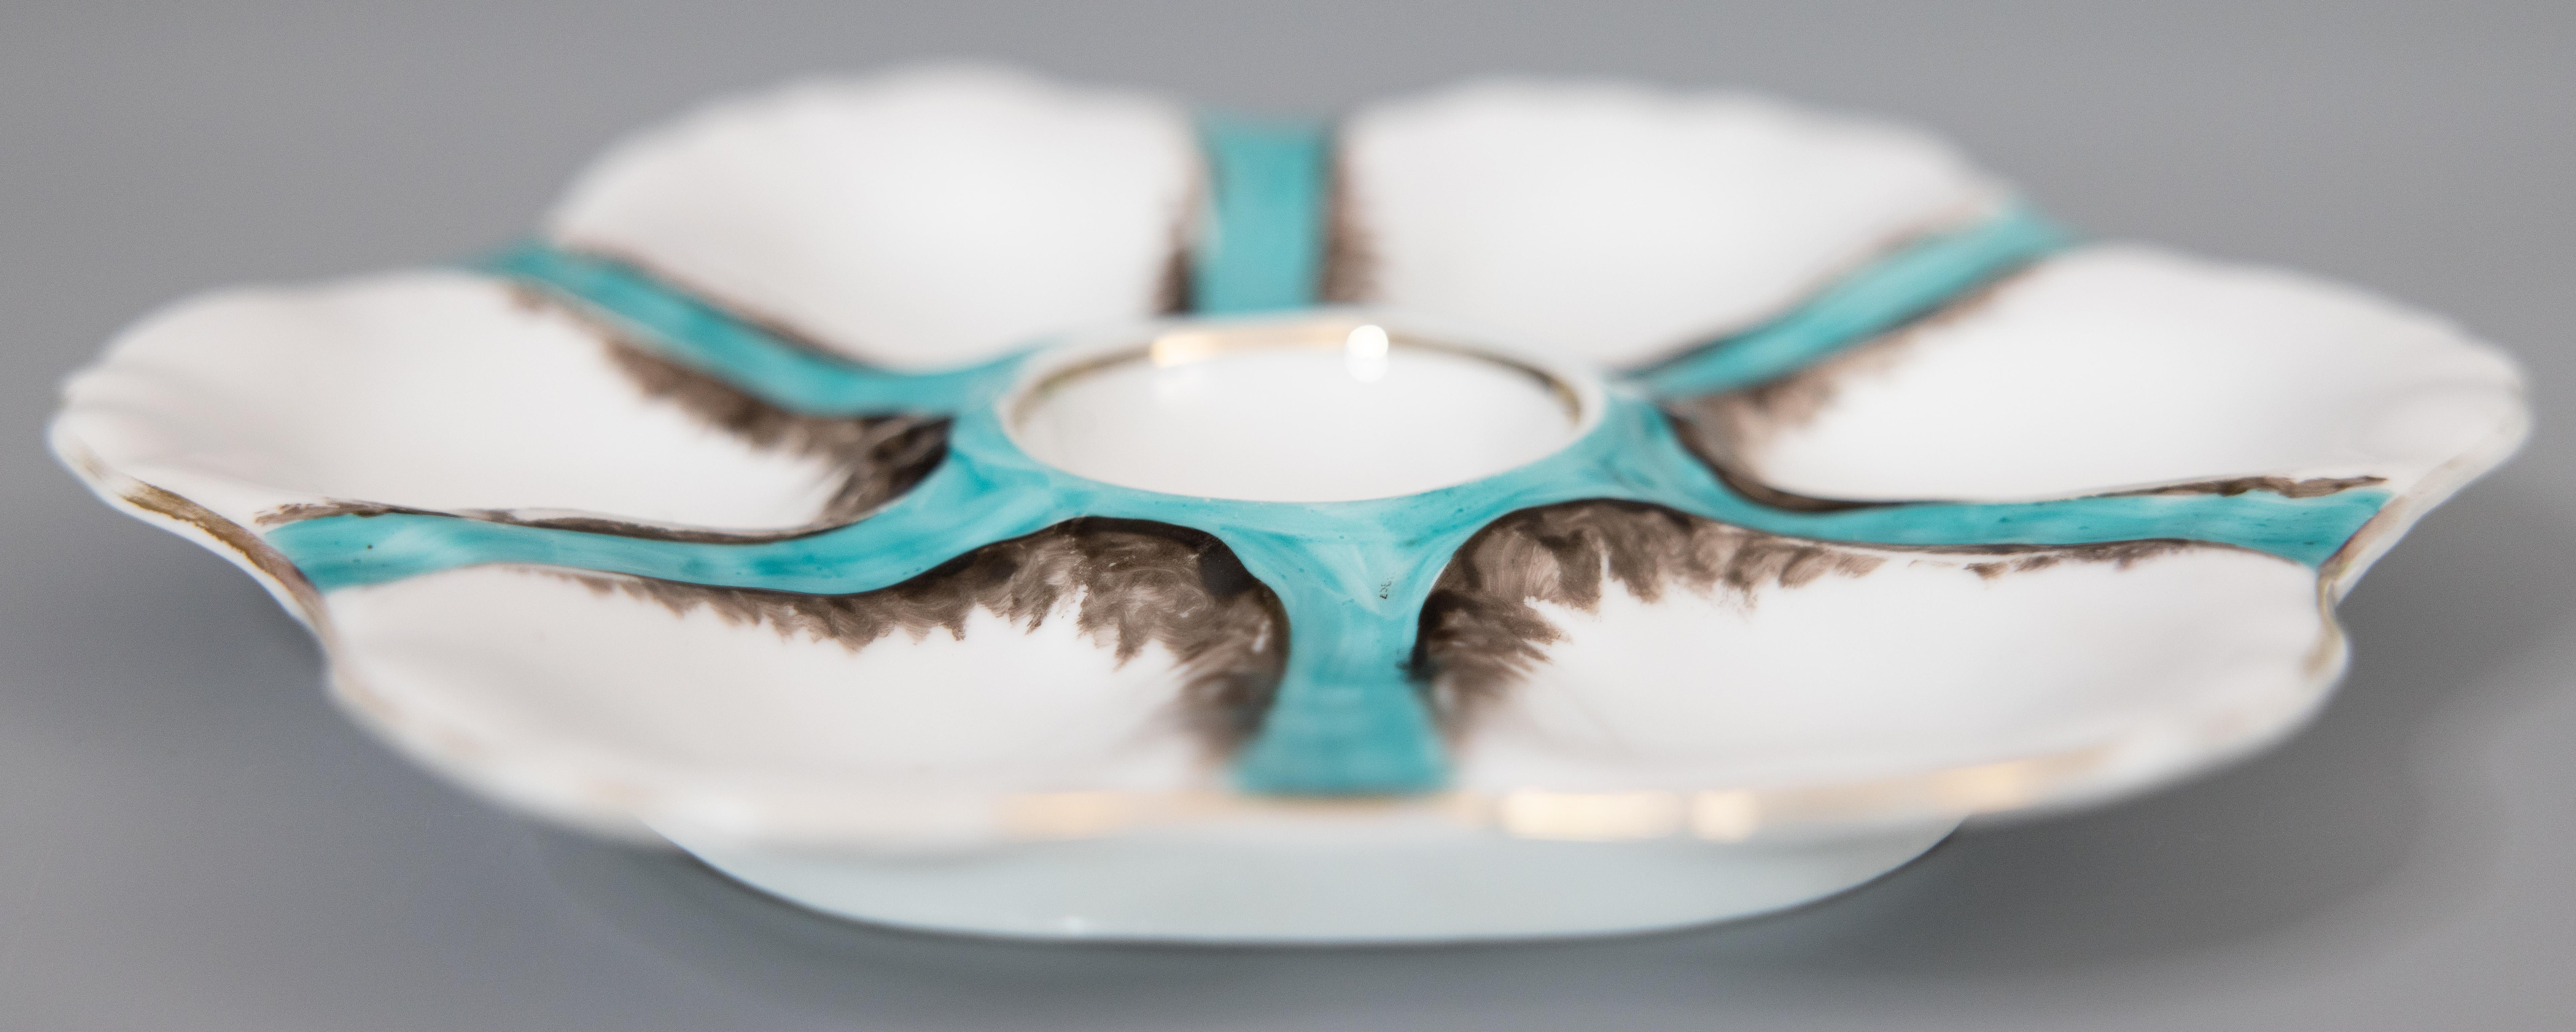 Antique French Porcelain Turquoise Oyster Plate In Good Condition For Sale In Pearland, TX